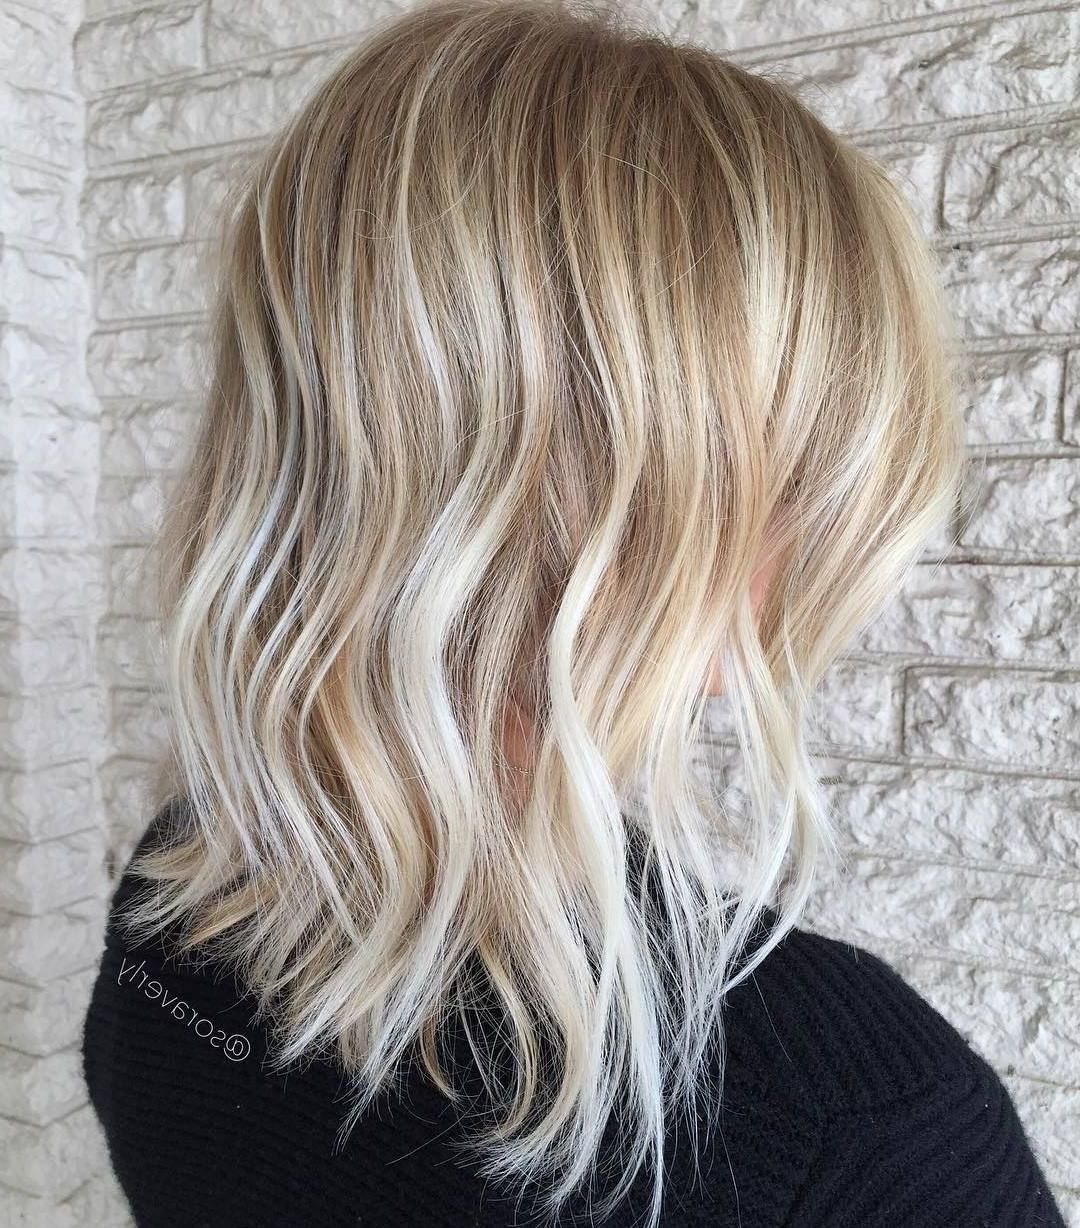 Pinterest Pertaining To Favorite Choppy Cut Blonde Hairstyles With Bright Frame (View 3 of 20)